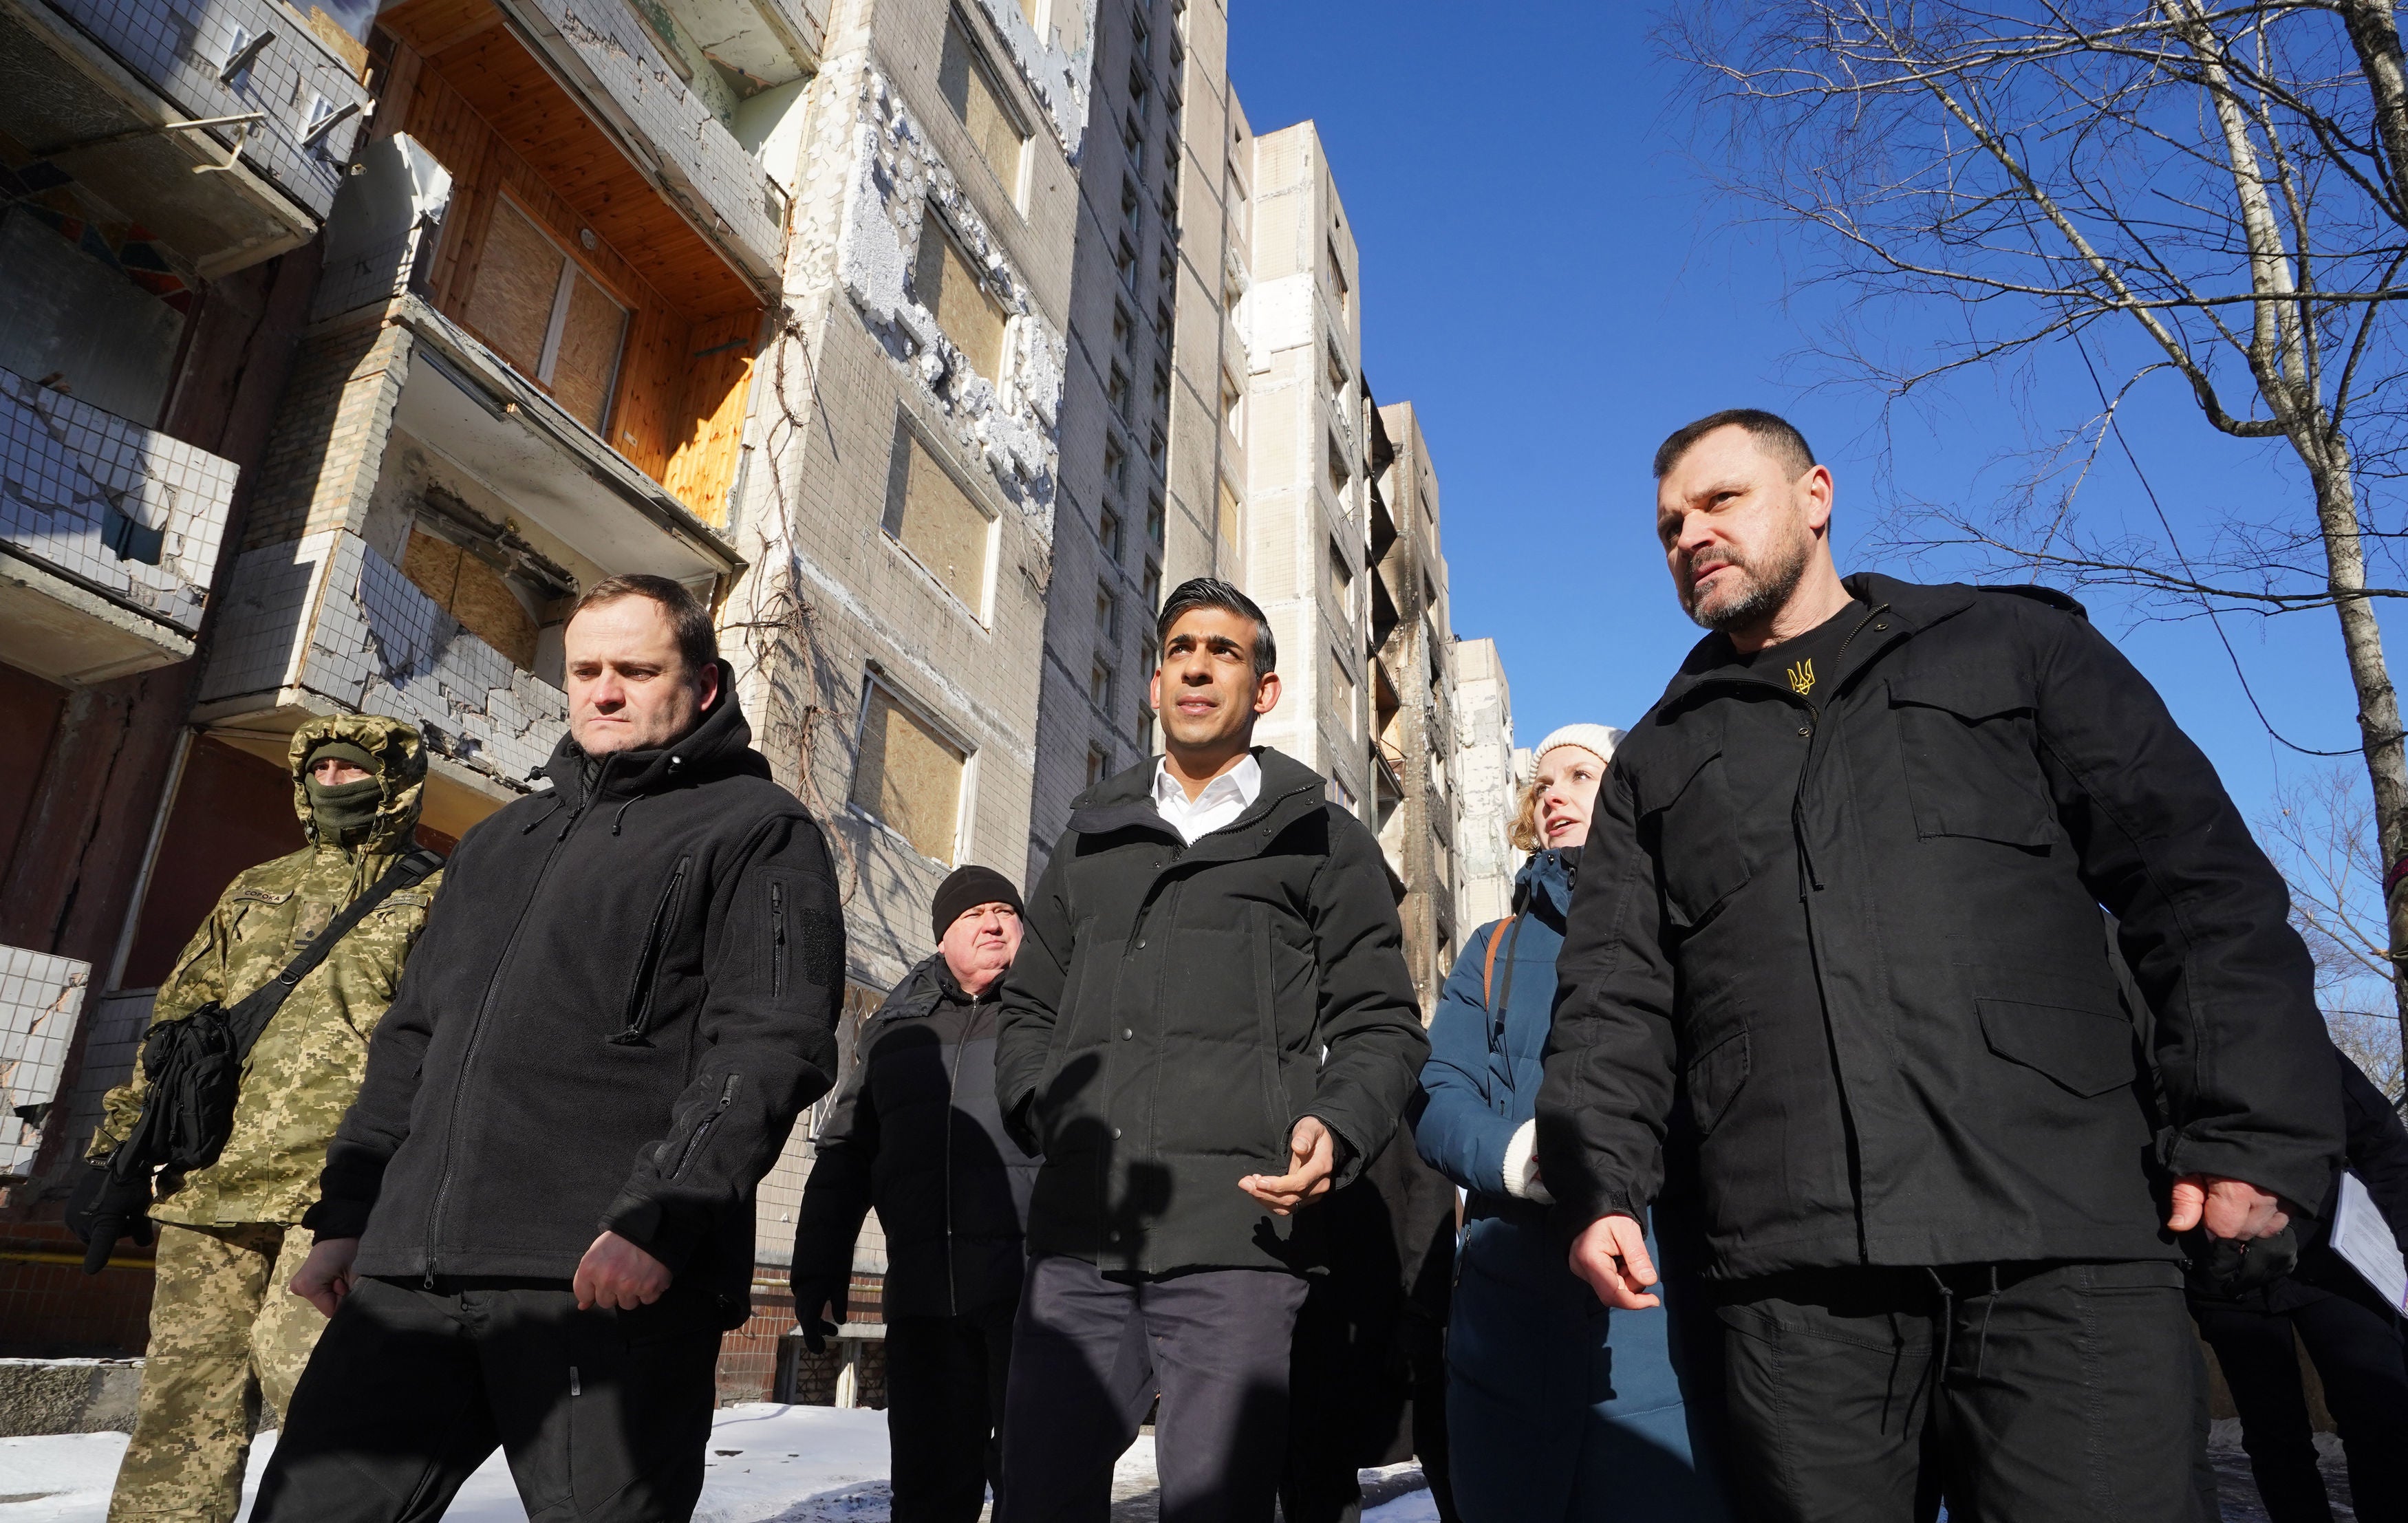 Sunak is shown damaged buildings in Kyiv ahead of his meeting with Zelensky